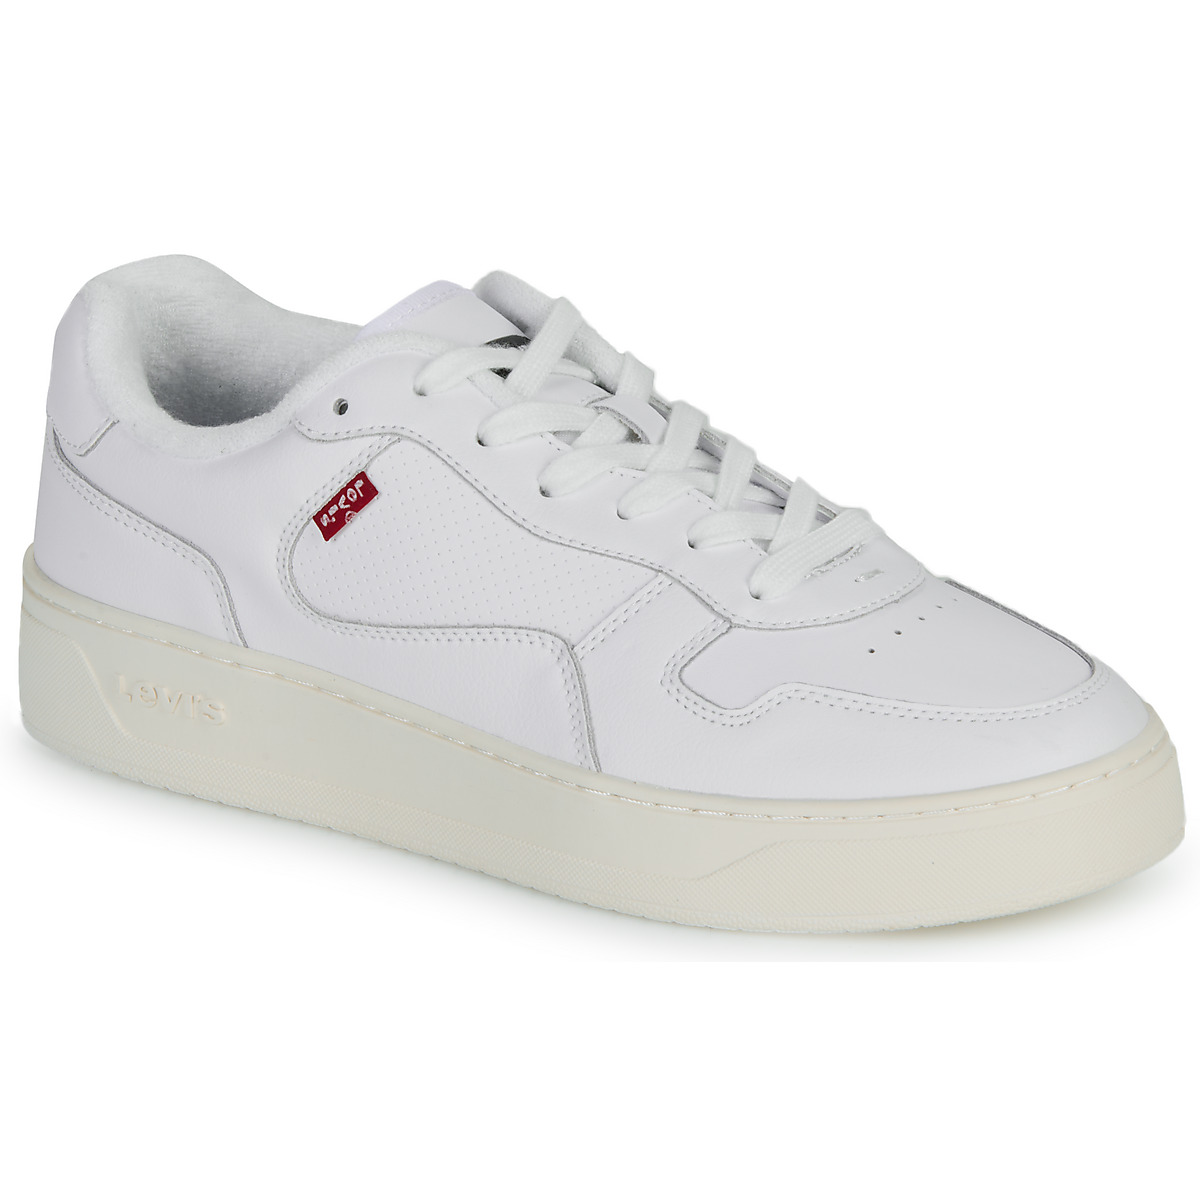 Chaussures Homme Baskets basses Levi's GLIDE Blanc